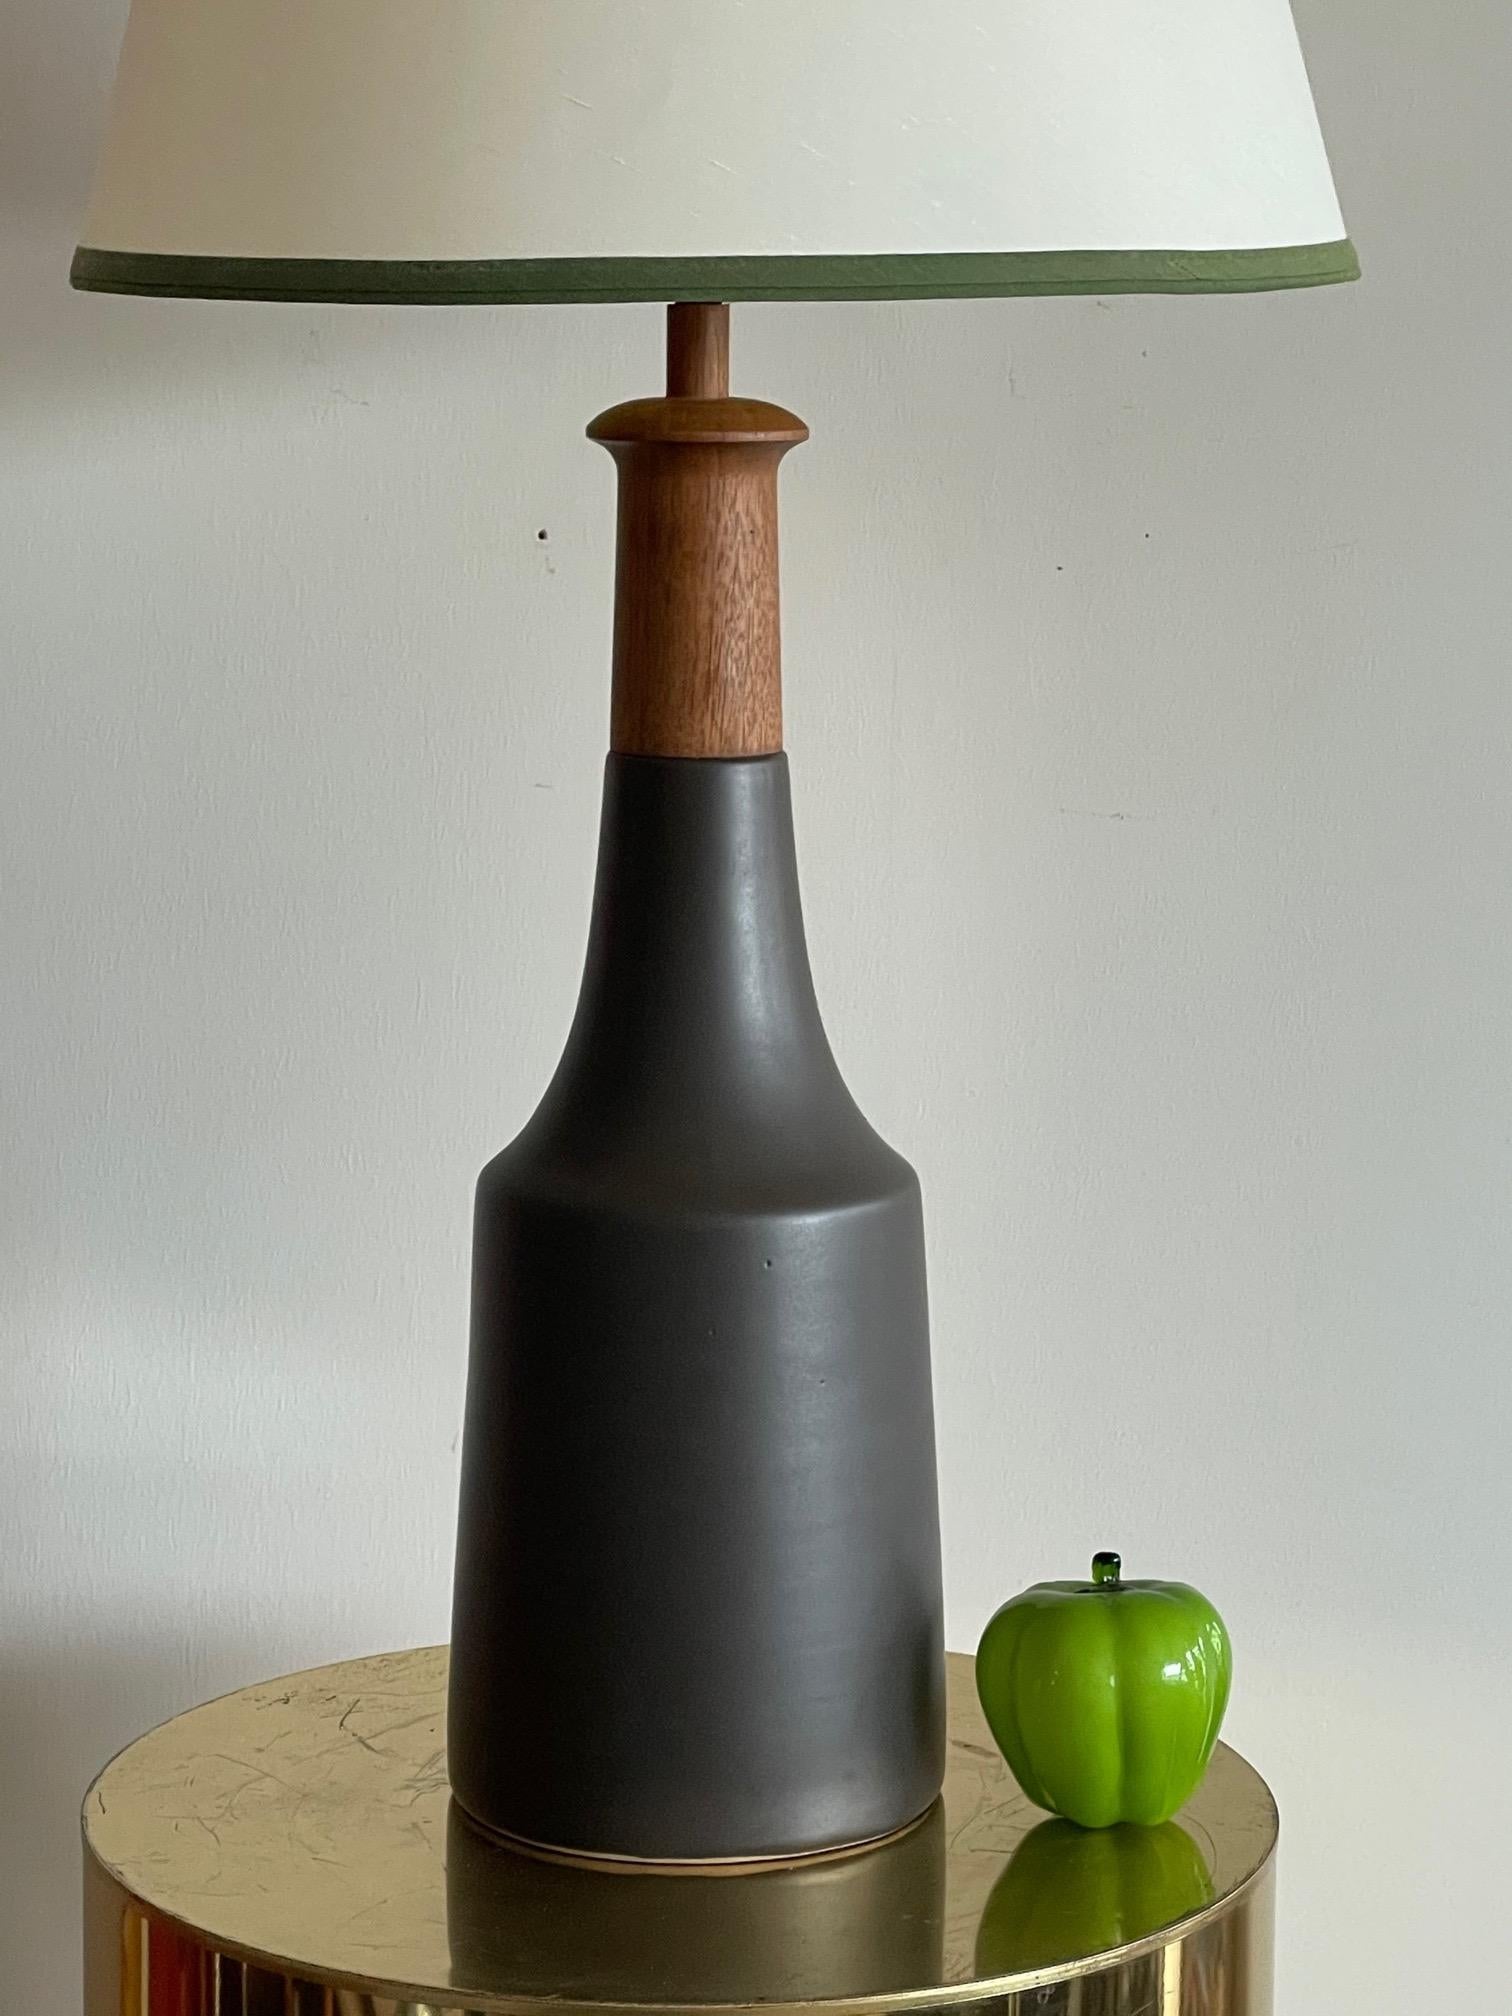 A classic large scale ceramic lamp by Martz. The color is dark brown-in certain light can look almost black-gray. Measures approx. 7